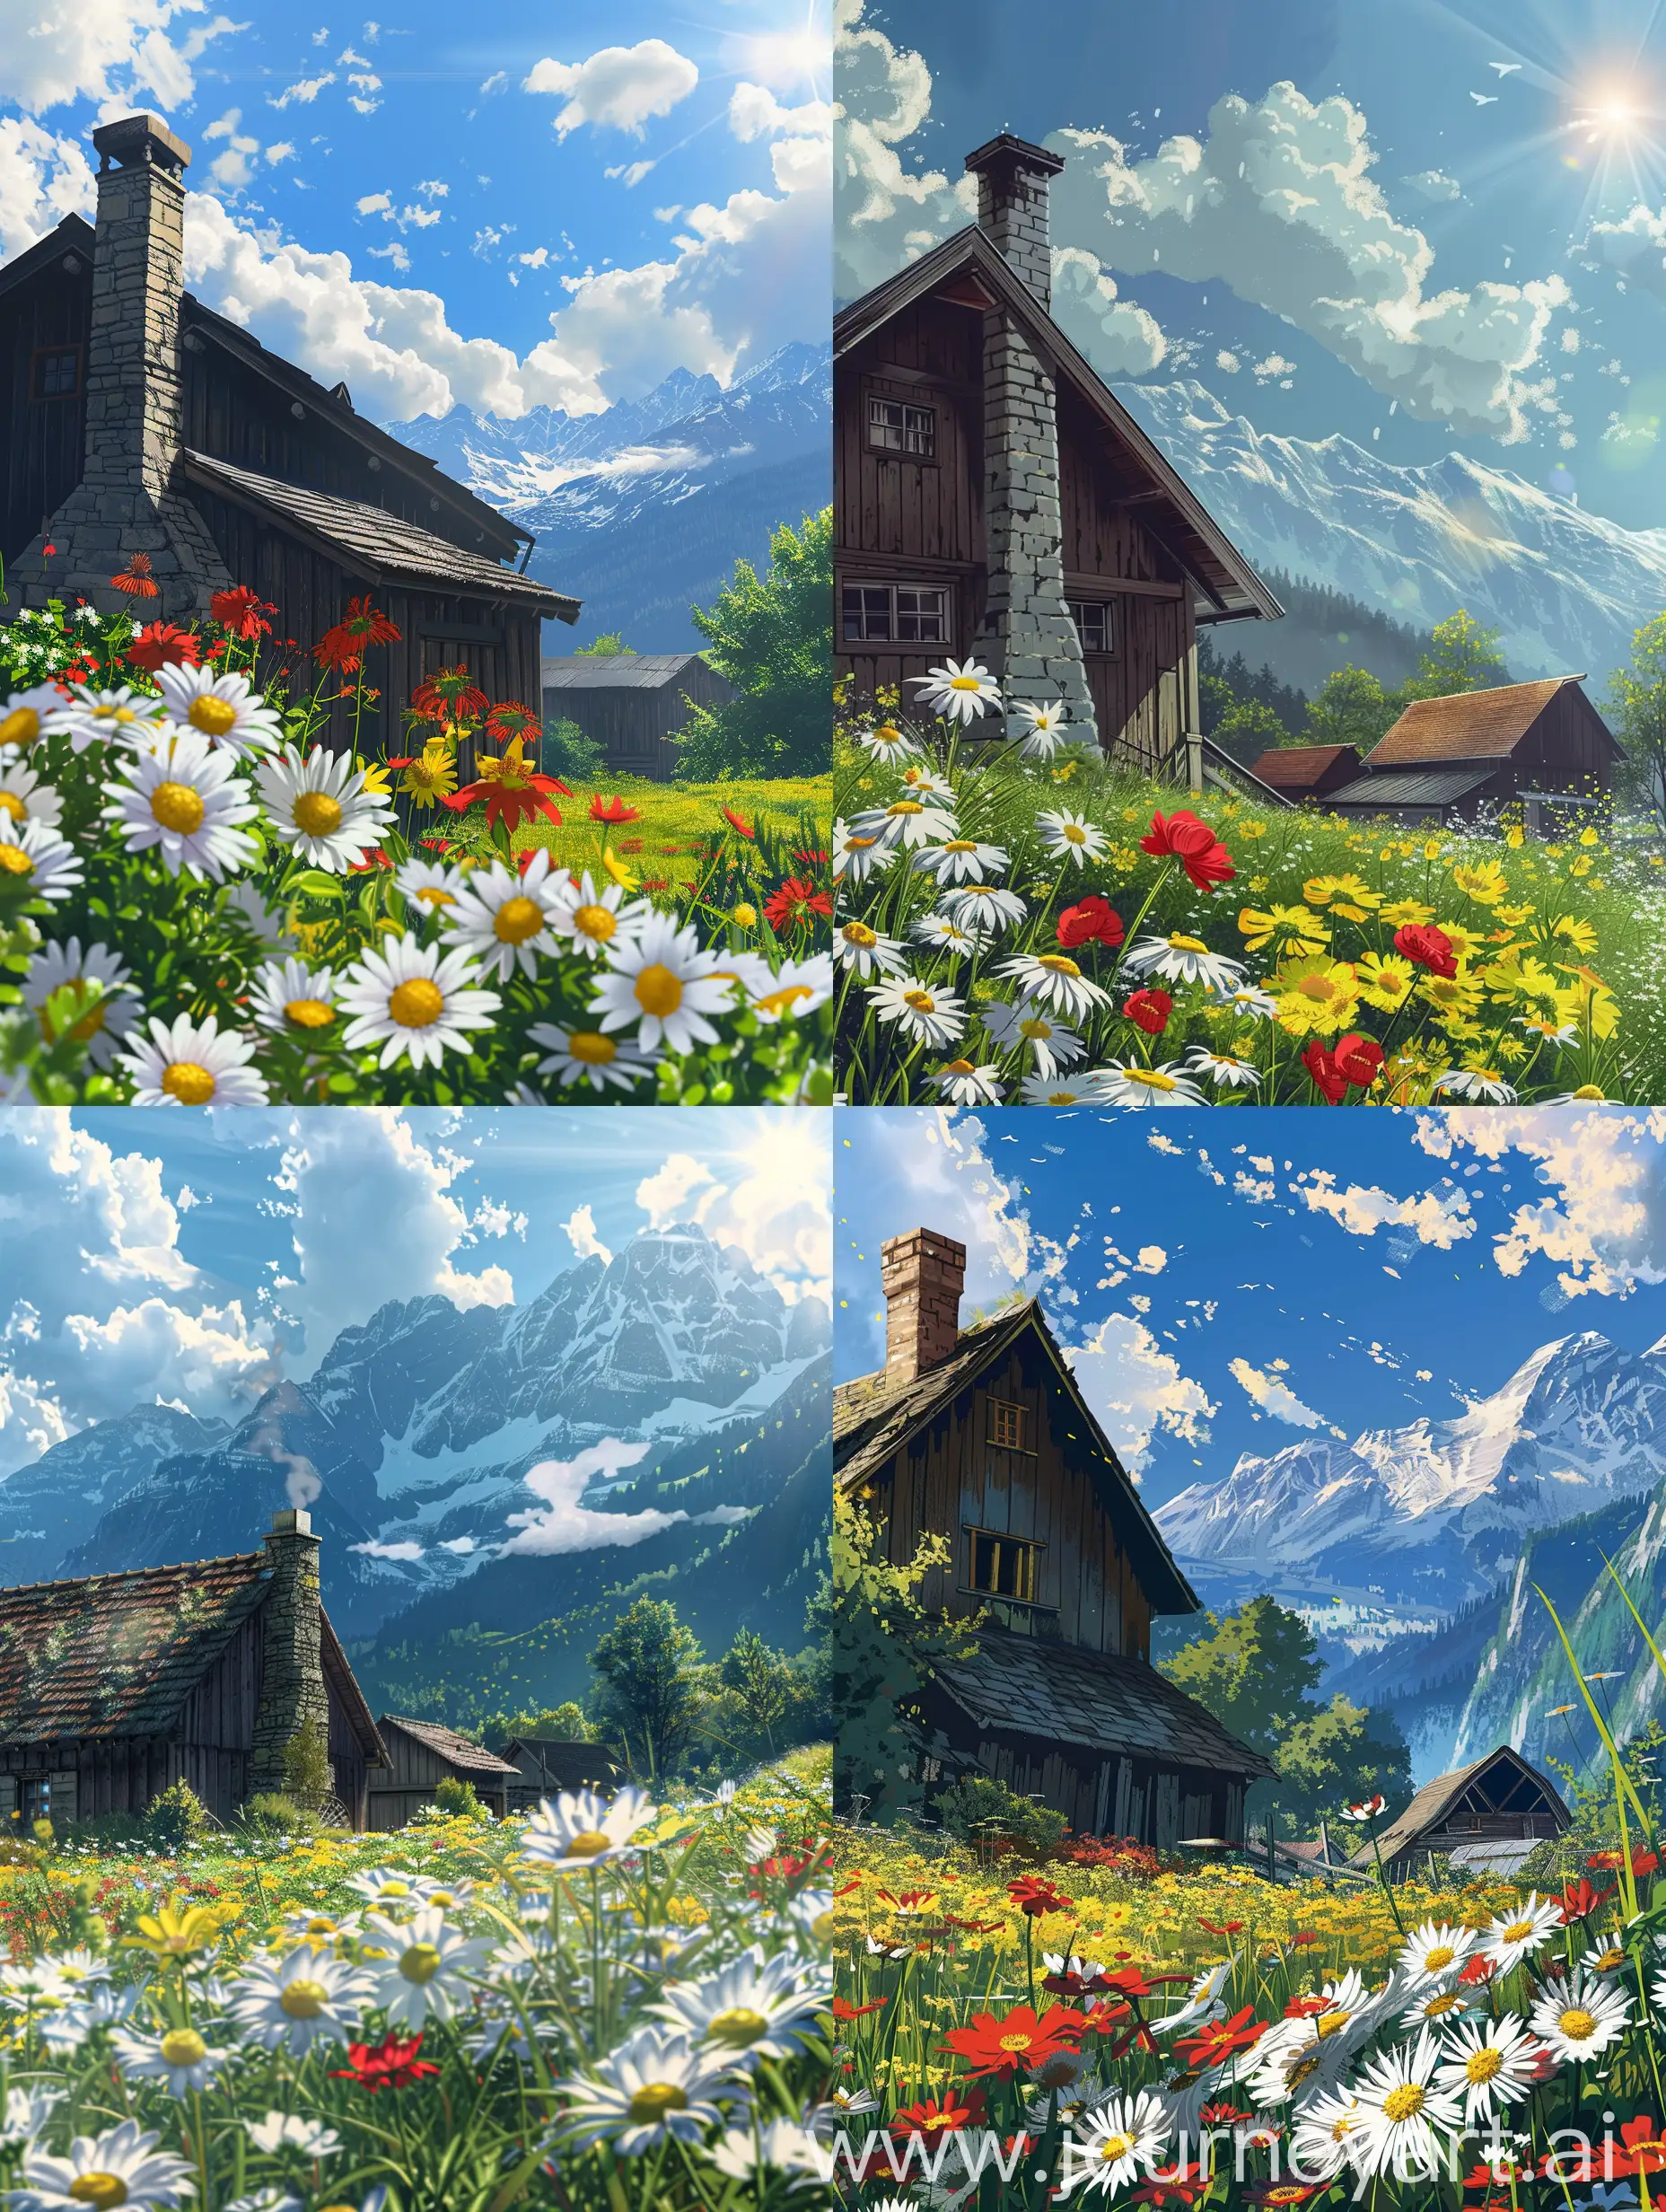 Beautiful anime scenary,mokoto shinkai style, Switzerland charming cottage, chimney, spring upcomming, beautiful white , yellow, red flowers , morning look, barn beside cottage, mountain background, sun showing, clouds, breeze, illustration, close up view, ultra HD, high quality, sharp details, no hyperrealistic,summers.